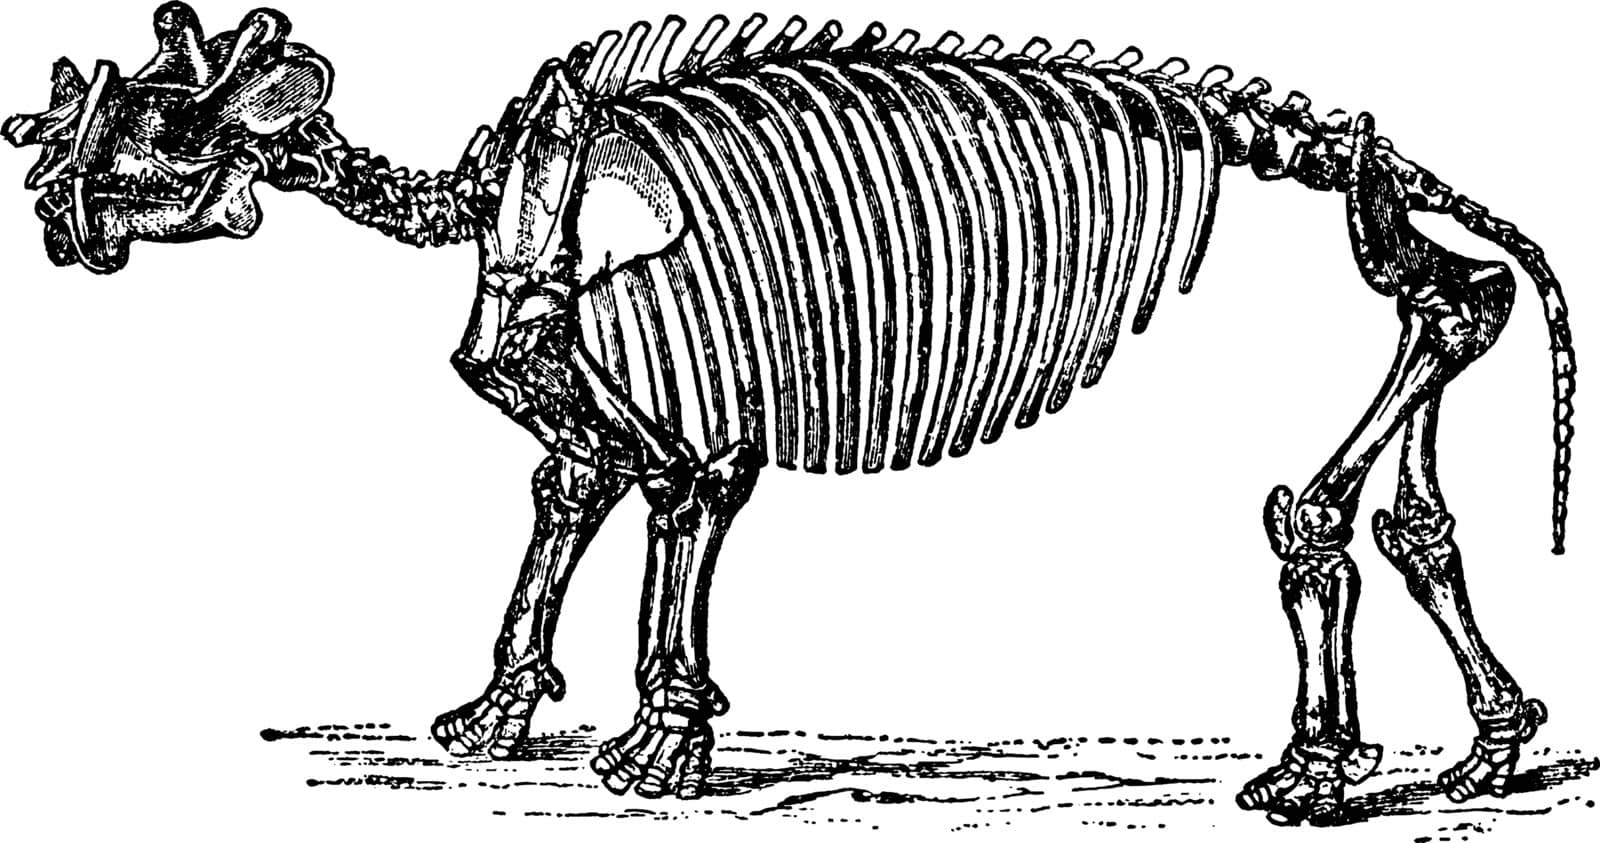 Dinoceras Skeleton which is an extinct genus of herbivorous mammal that lived during the Eocene epoch, vintage line drawing or engraving illustration.